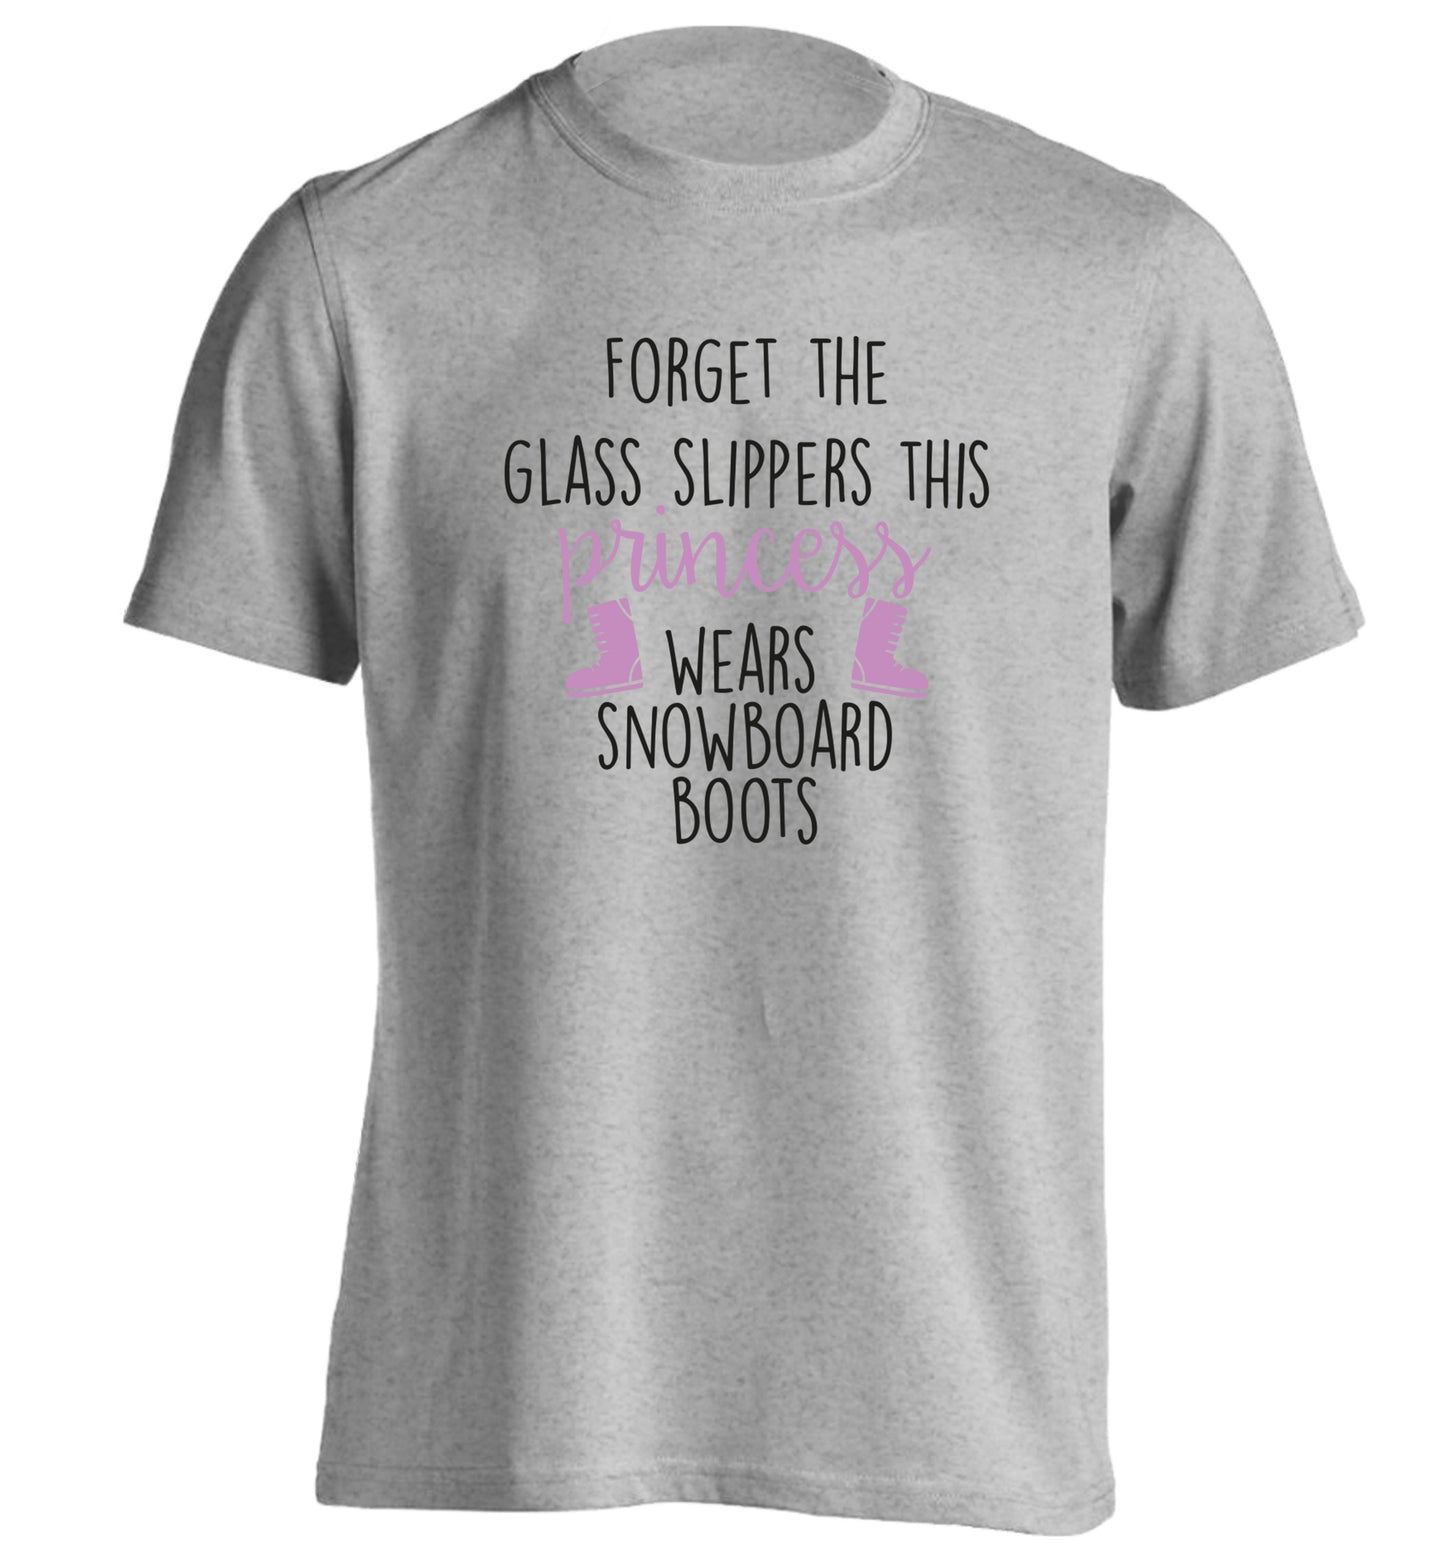 Forget the glass slippers this princess wears snowboard boots adults unisex grey Tshirt 2XL